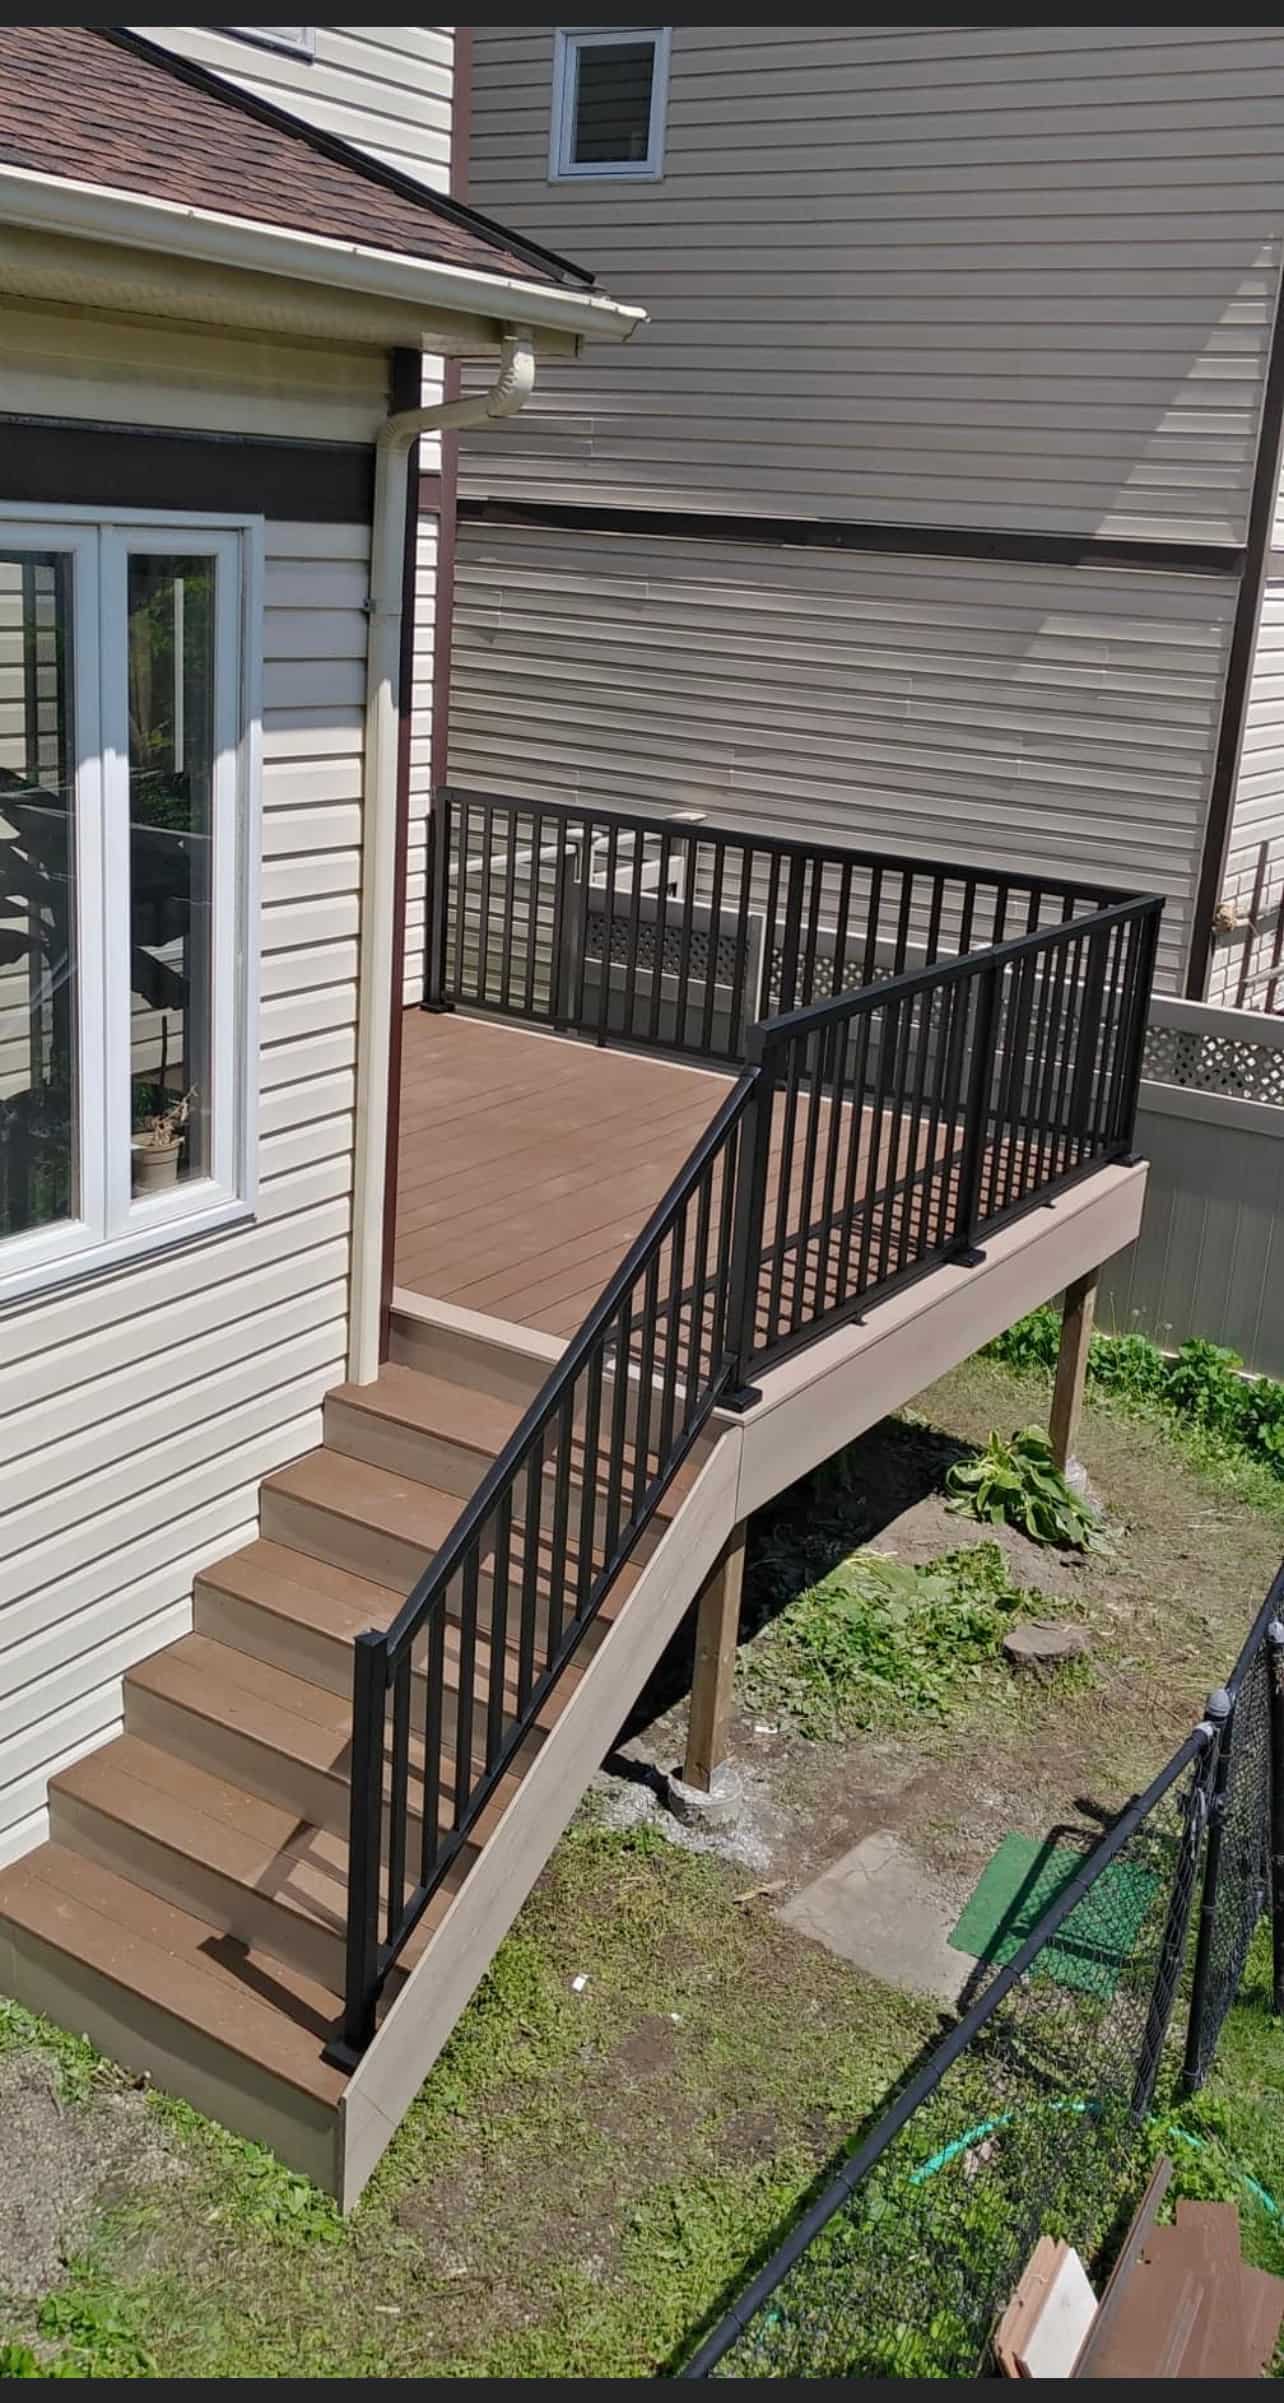 A newly constructed elevated deck with a modern integrated railing system enhances this home's outdoor space, featuring steps leading down to a lush garden area.